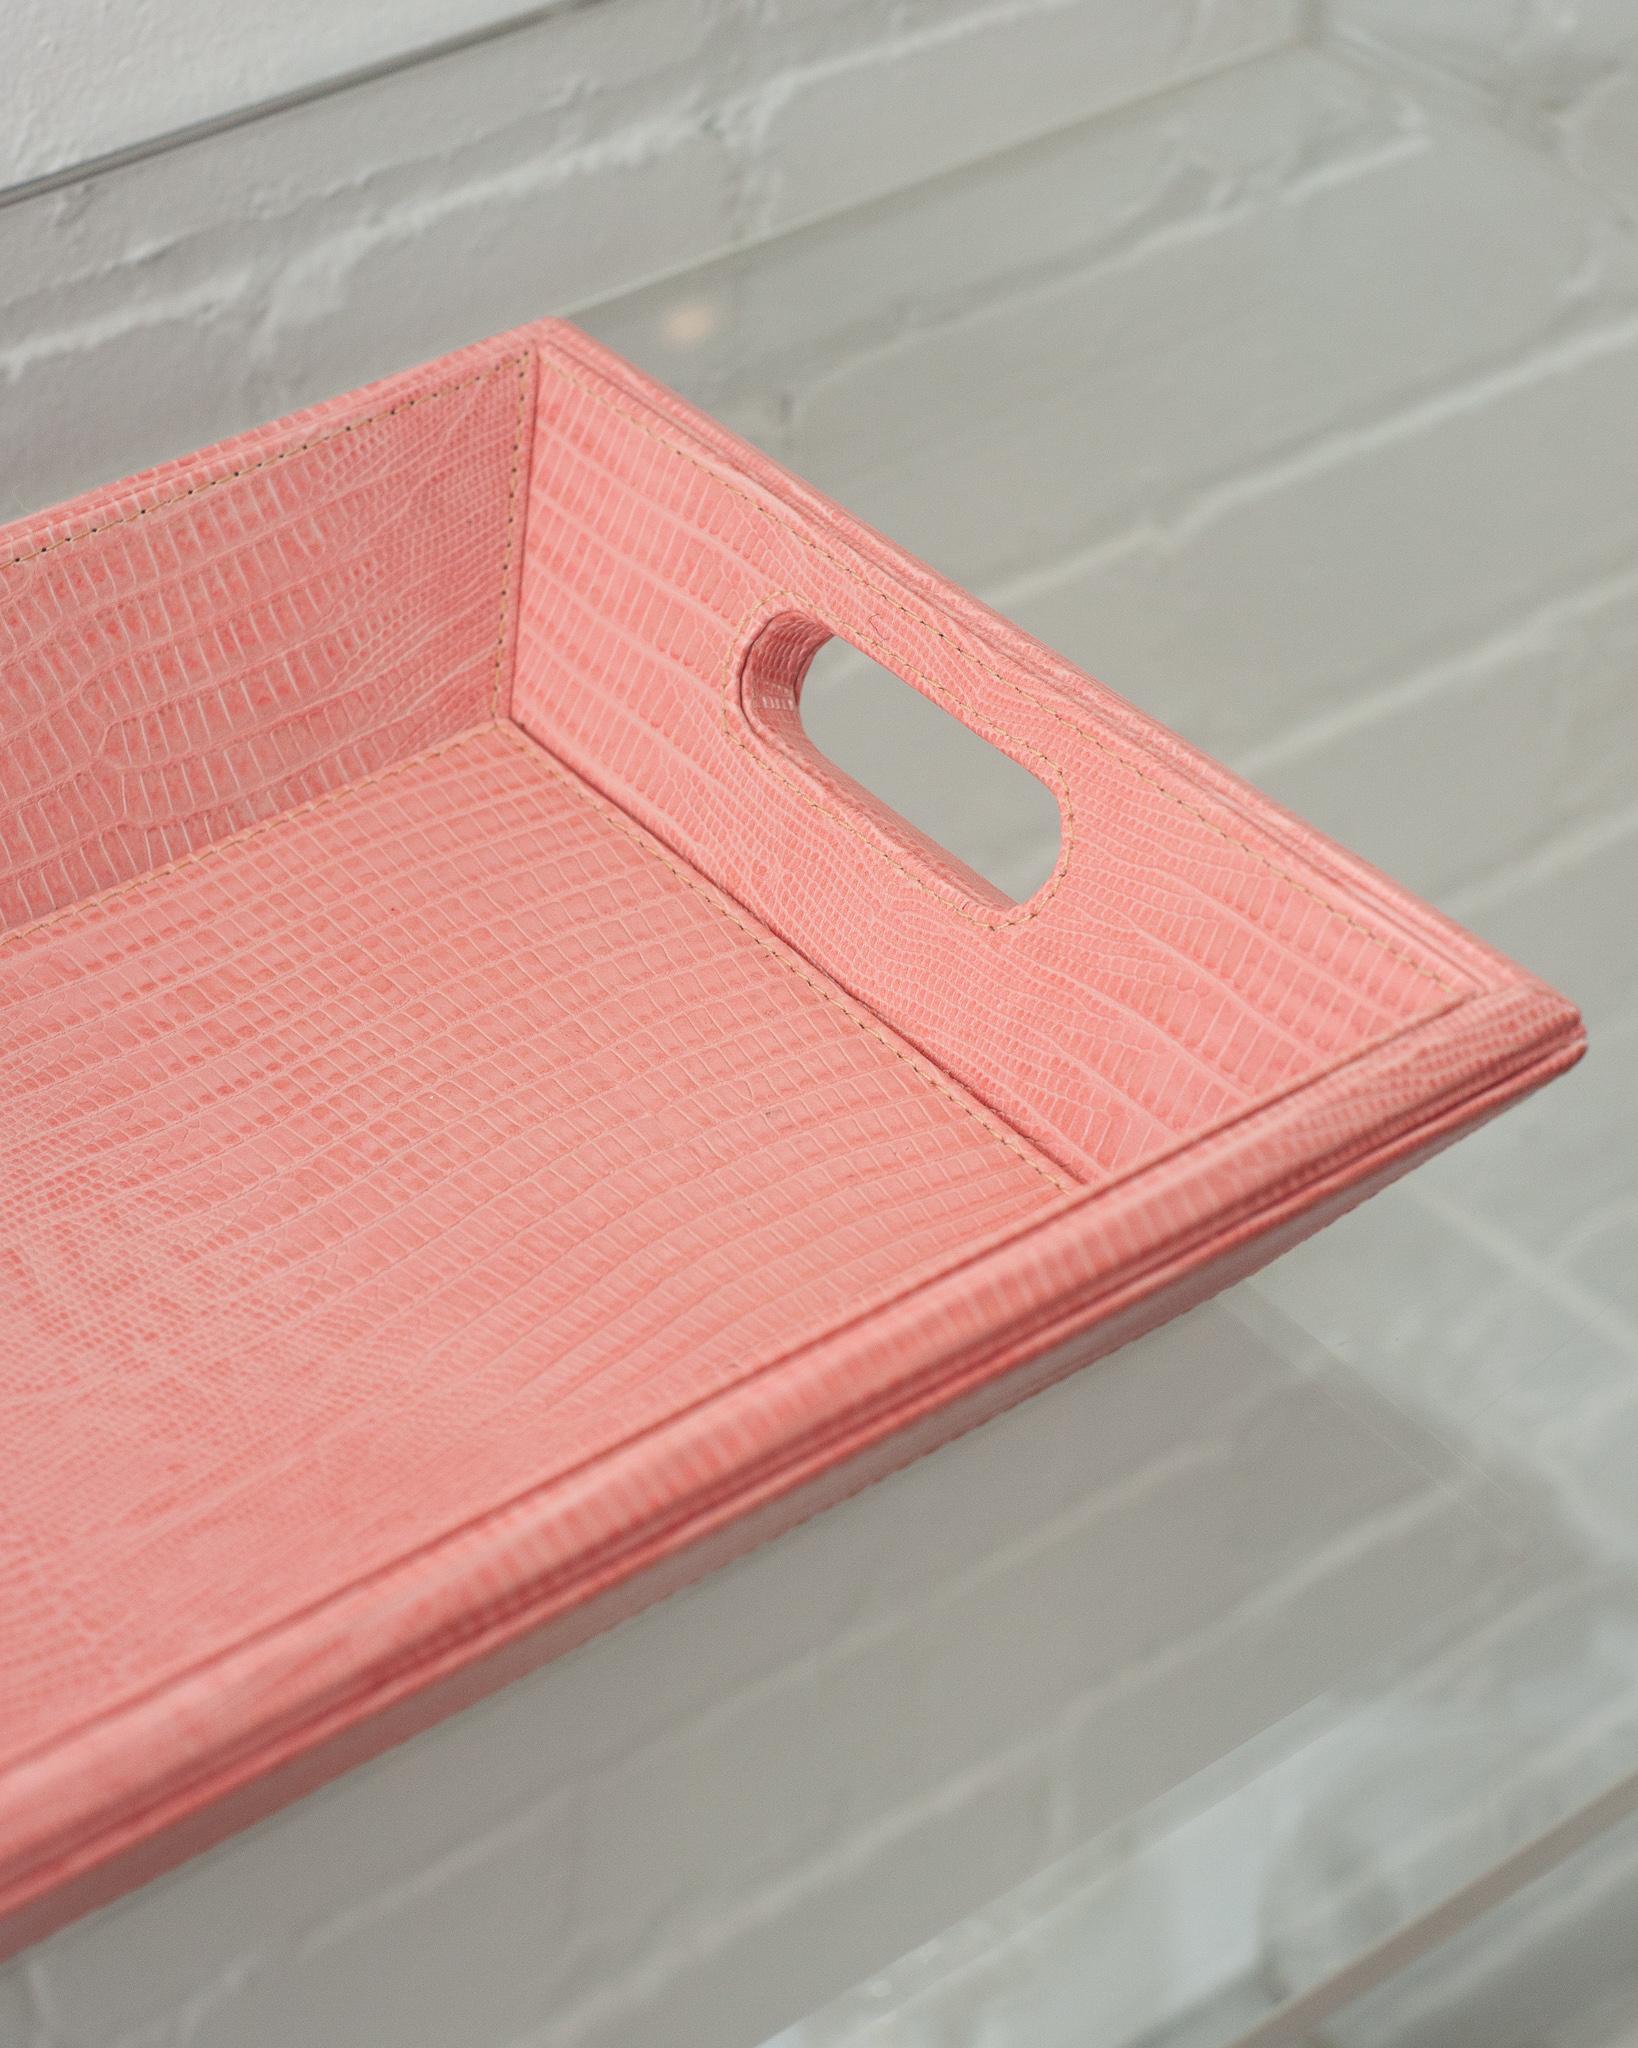 A beautiful pink lizard embossed leather tray, perfect for the desk, bedside table, or use as a serving piece. Fully wrapped in embossed leather with stitched panels, each tray has two openings for carrying.